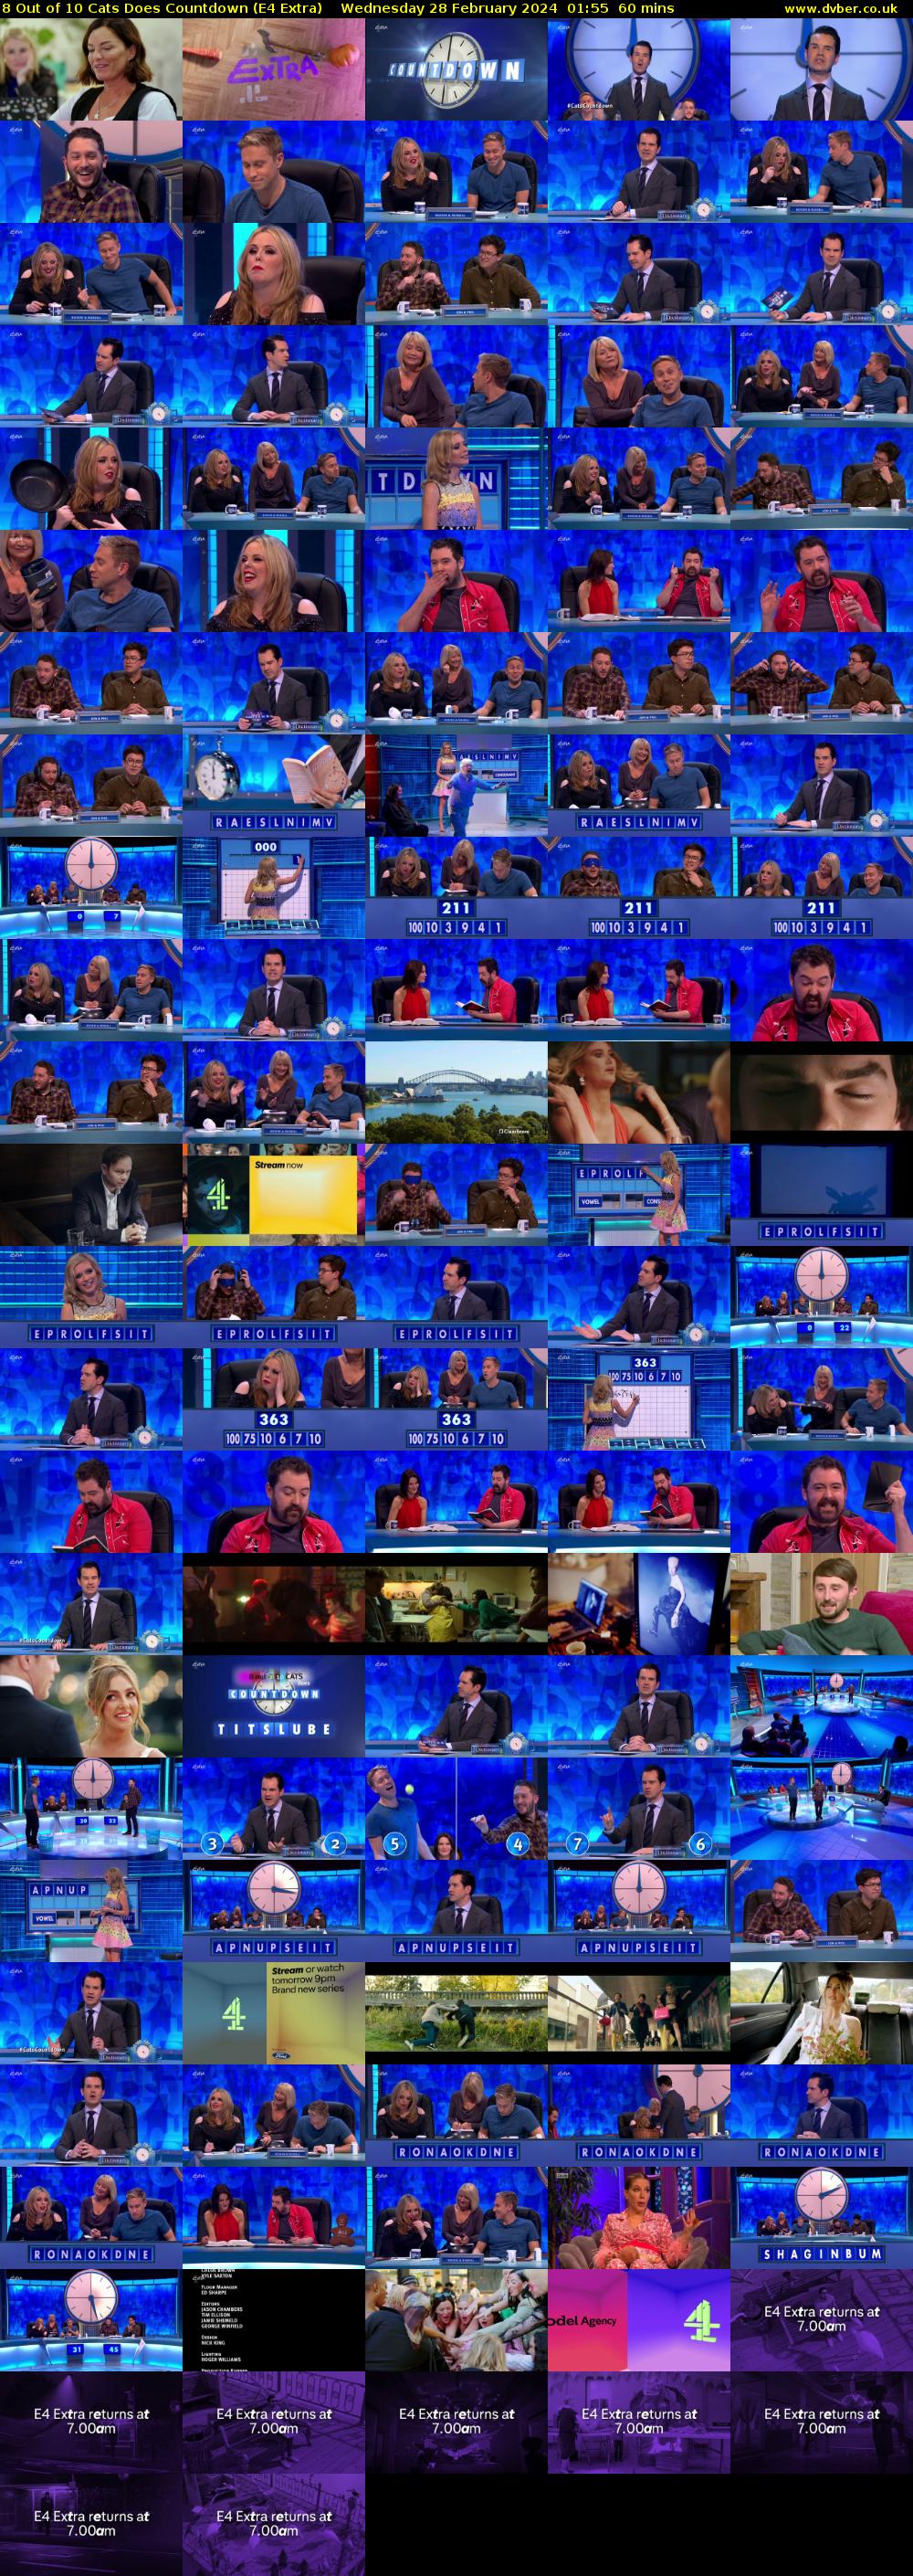 8 Out of 10 Cats Does Countdown (E4 Extra) Wednesday 28 February 2024 01:55 - 02:55